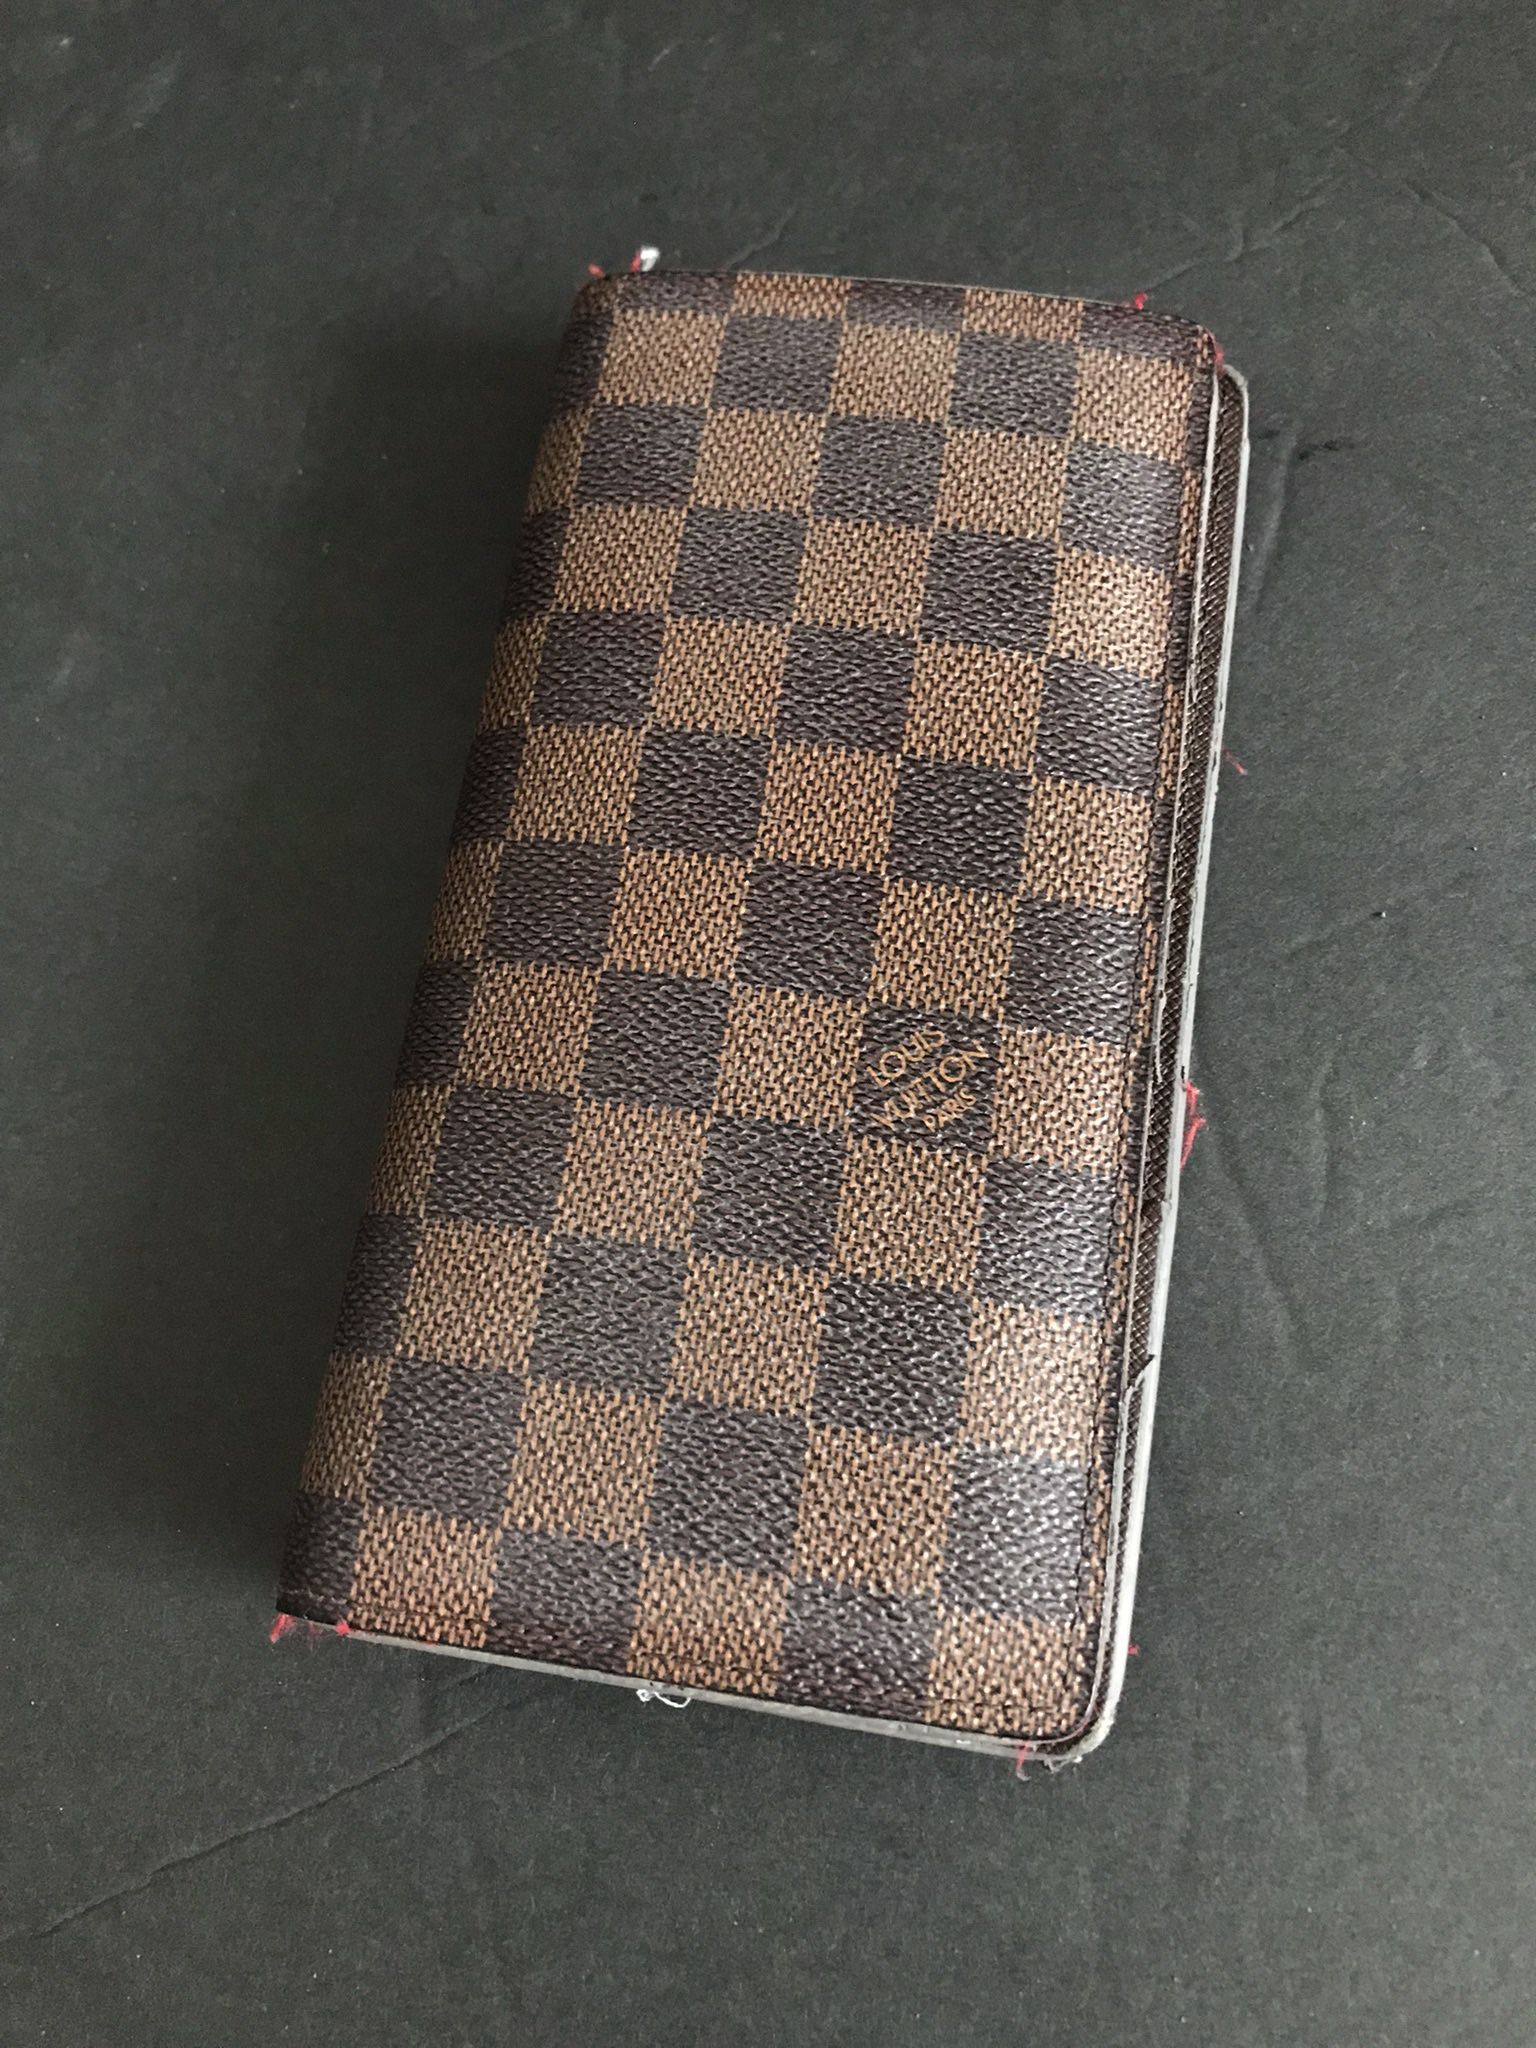 Lv Louis Vuitton Authentic Wallet for Sale in Miami, FL - OfferUp